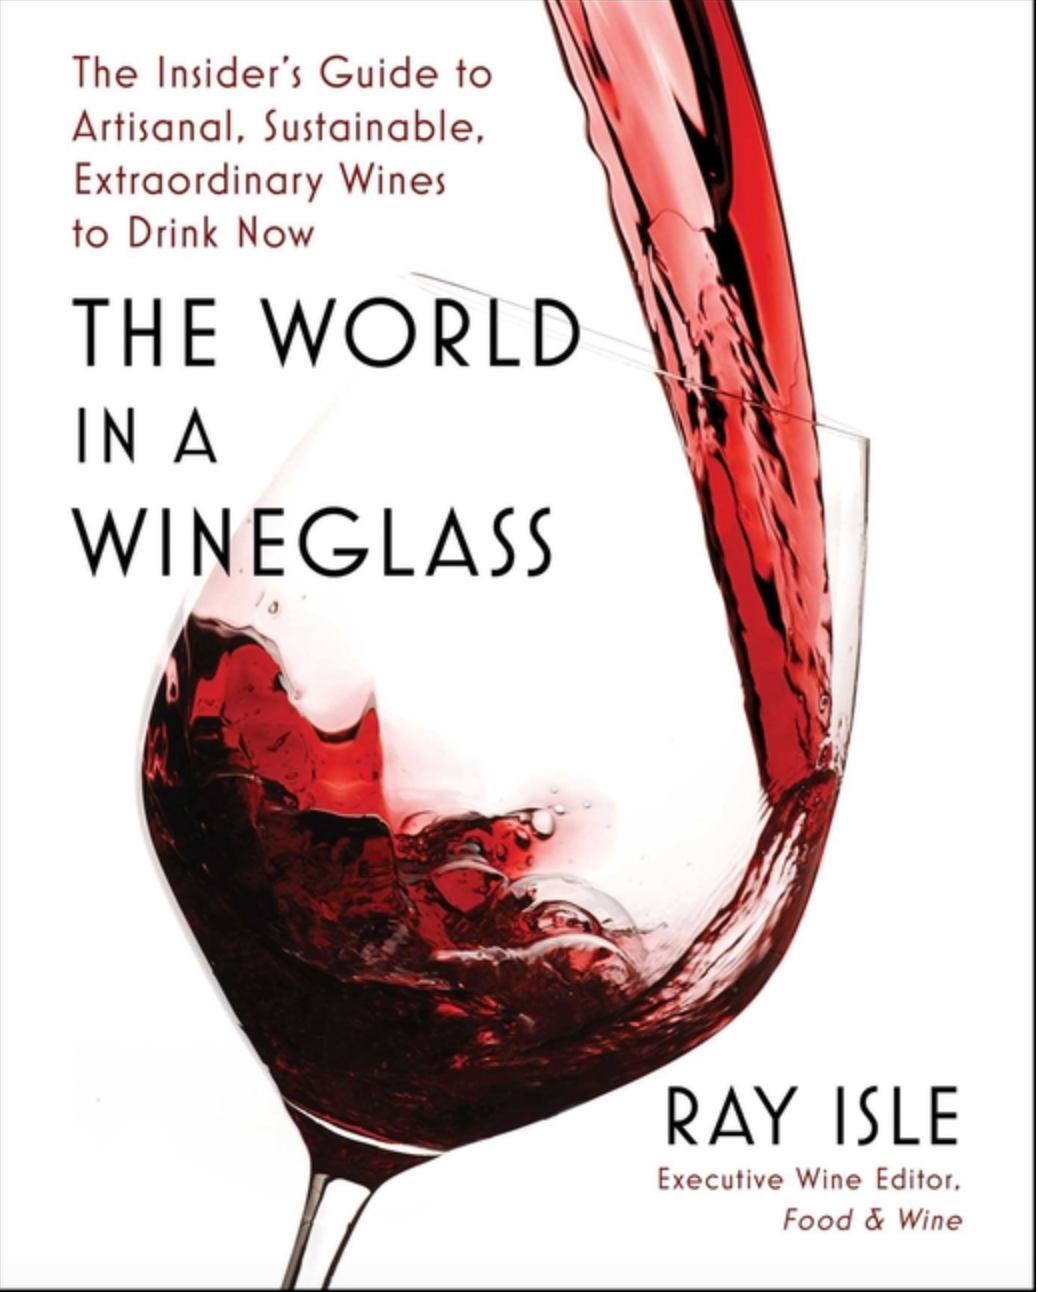 The World In a Wineglass